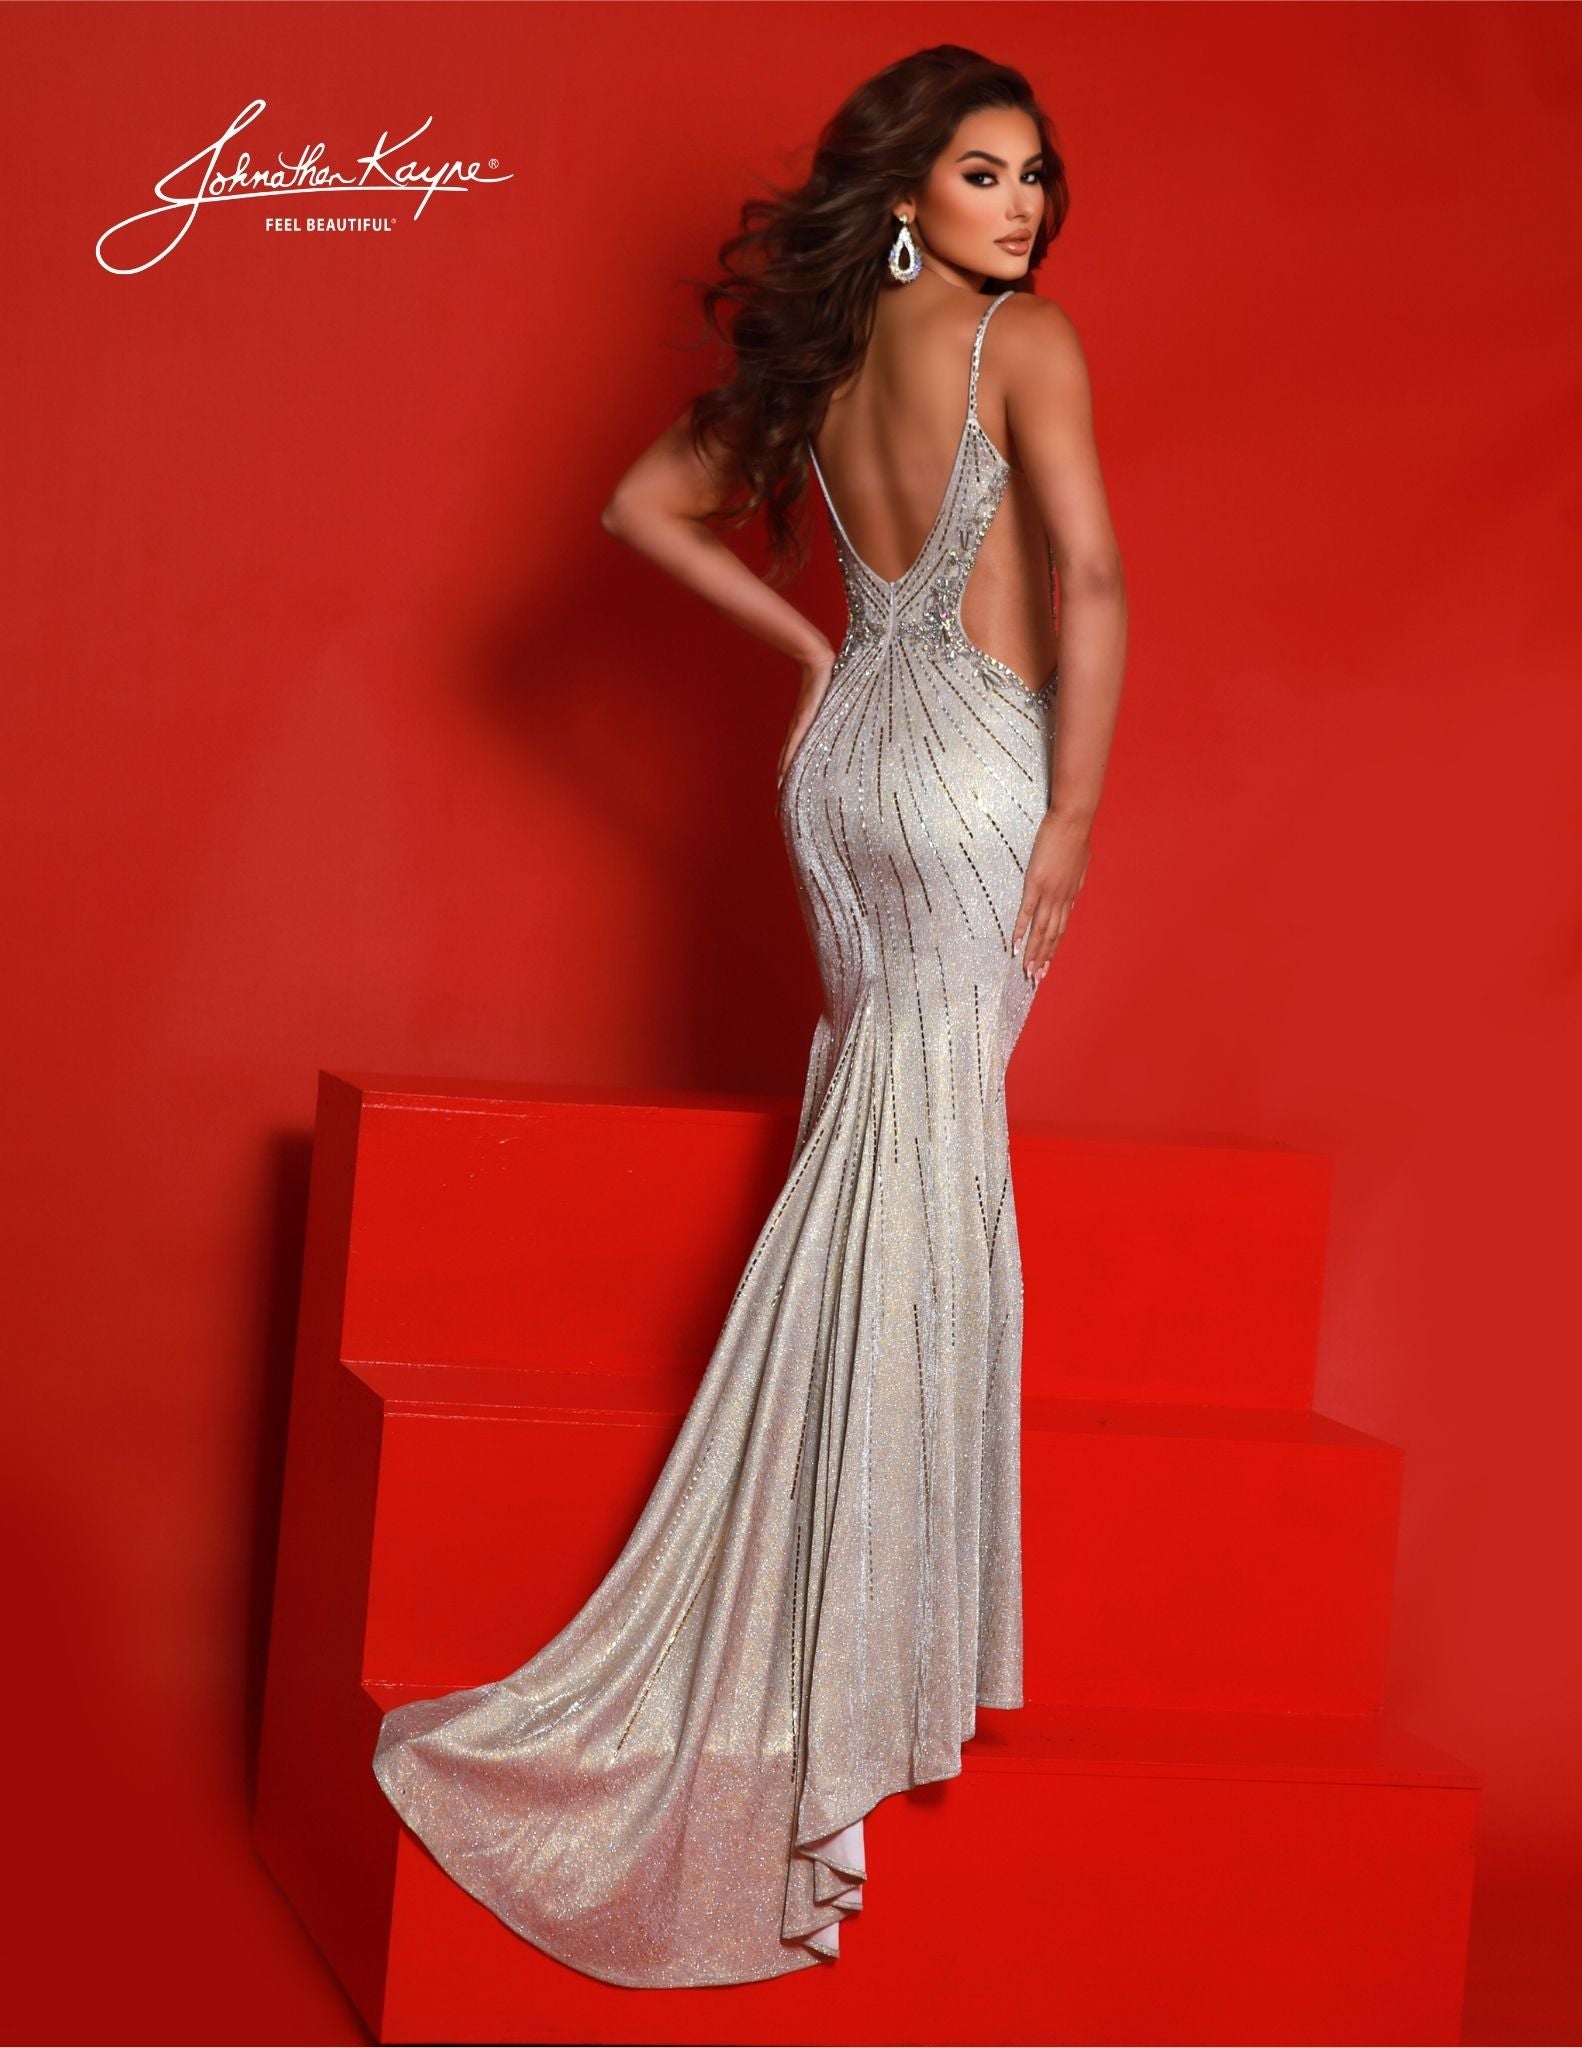 Look stunning in this metallic Johnathan Kayne 2850 formal dress. This floor-length gown features a V-Neck neckline, side cut outs, backless design, maxi slit, glitter knit mesh, and is perfect for any special event. Make a lasting impression in this beautiful gown! Prepare for an unforgettable night of luminance with our metallic glitter knit gown. The sultry sheer side cutouts, daring slit, and radiant glitter knit create a look that's both memorable and timeless.